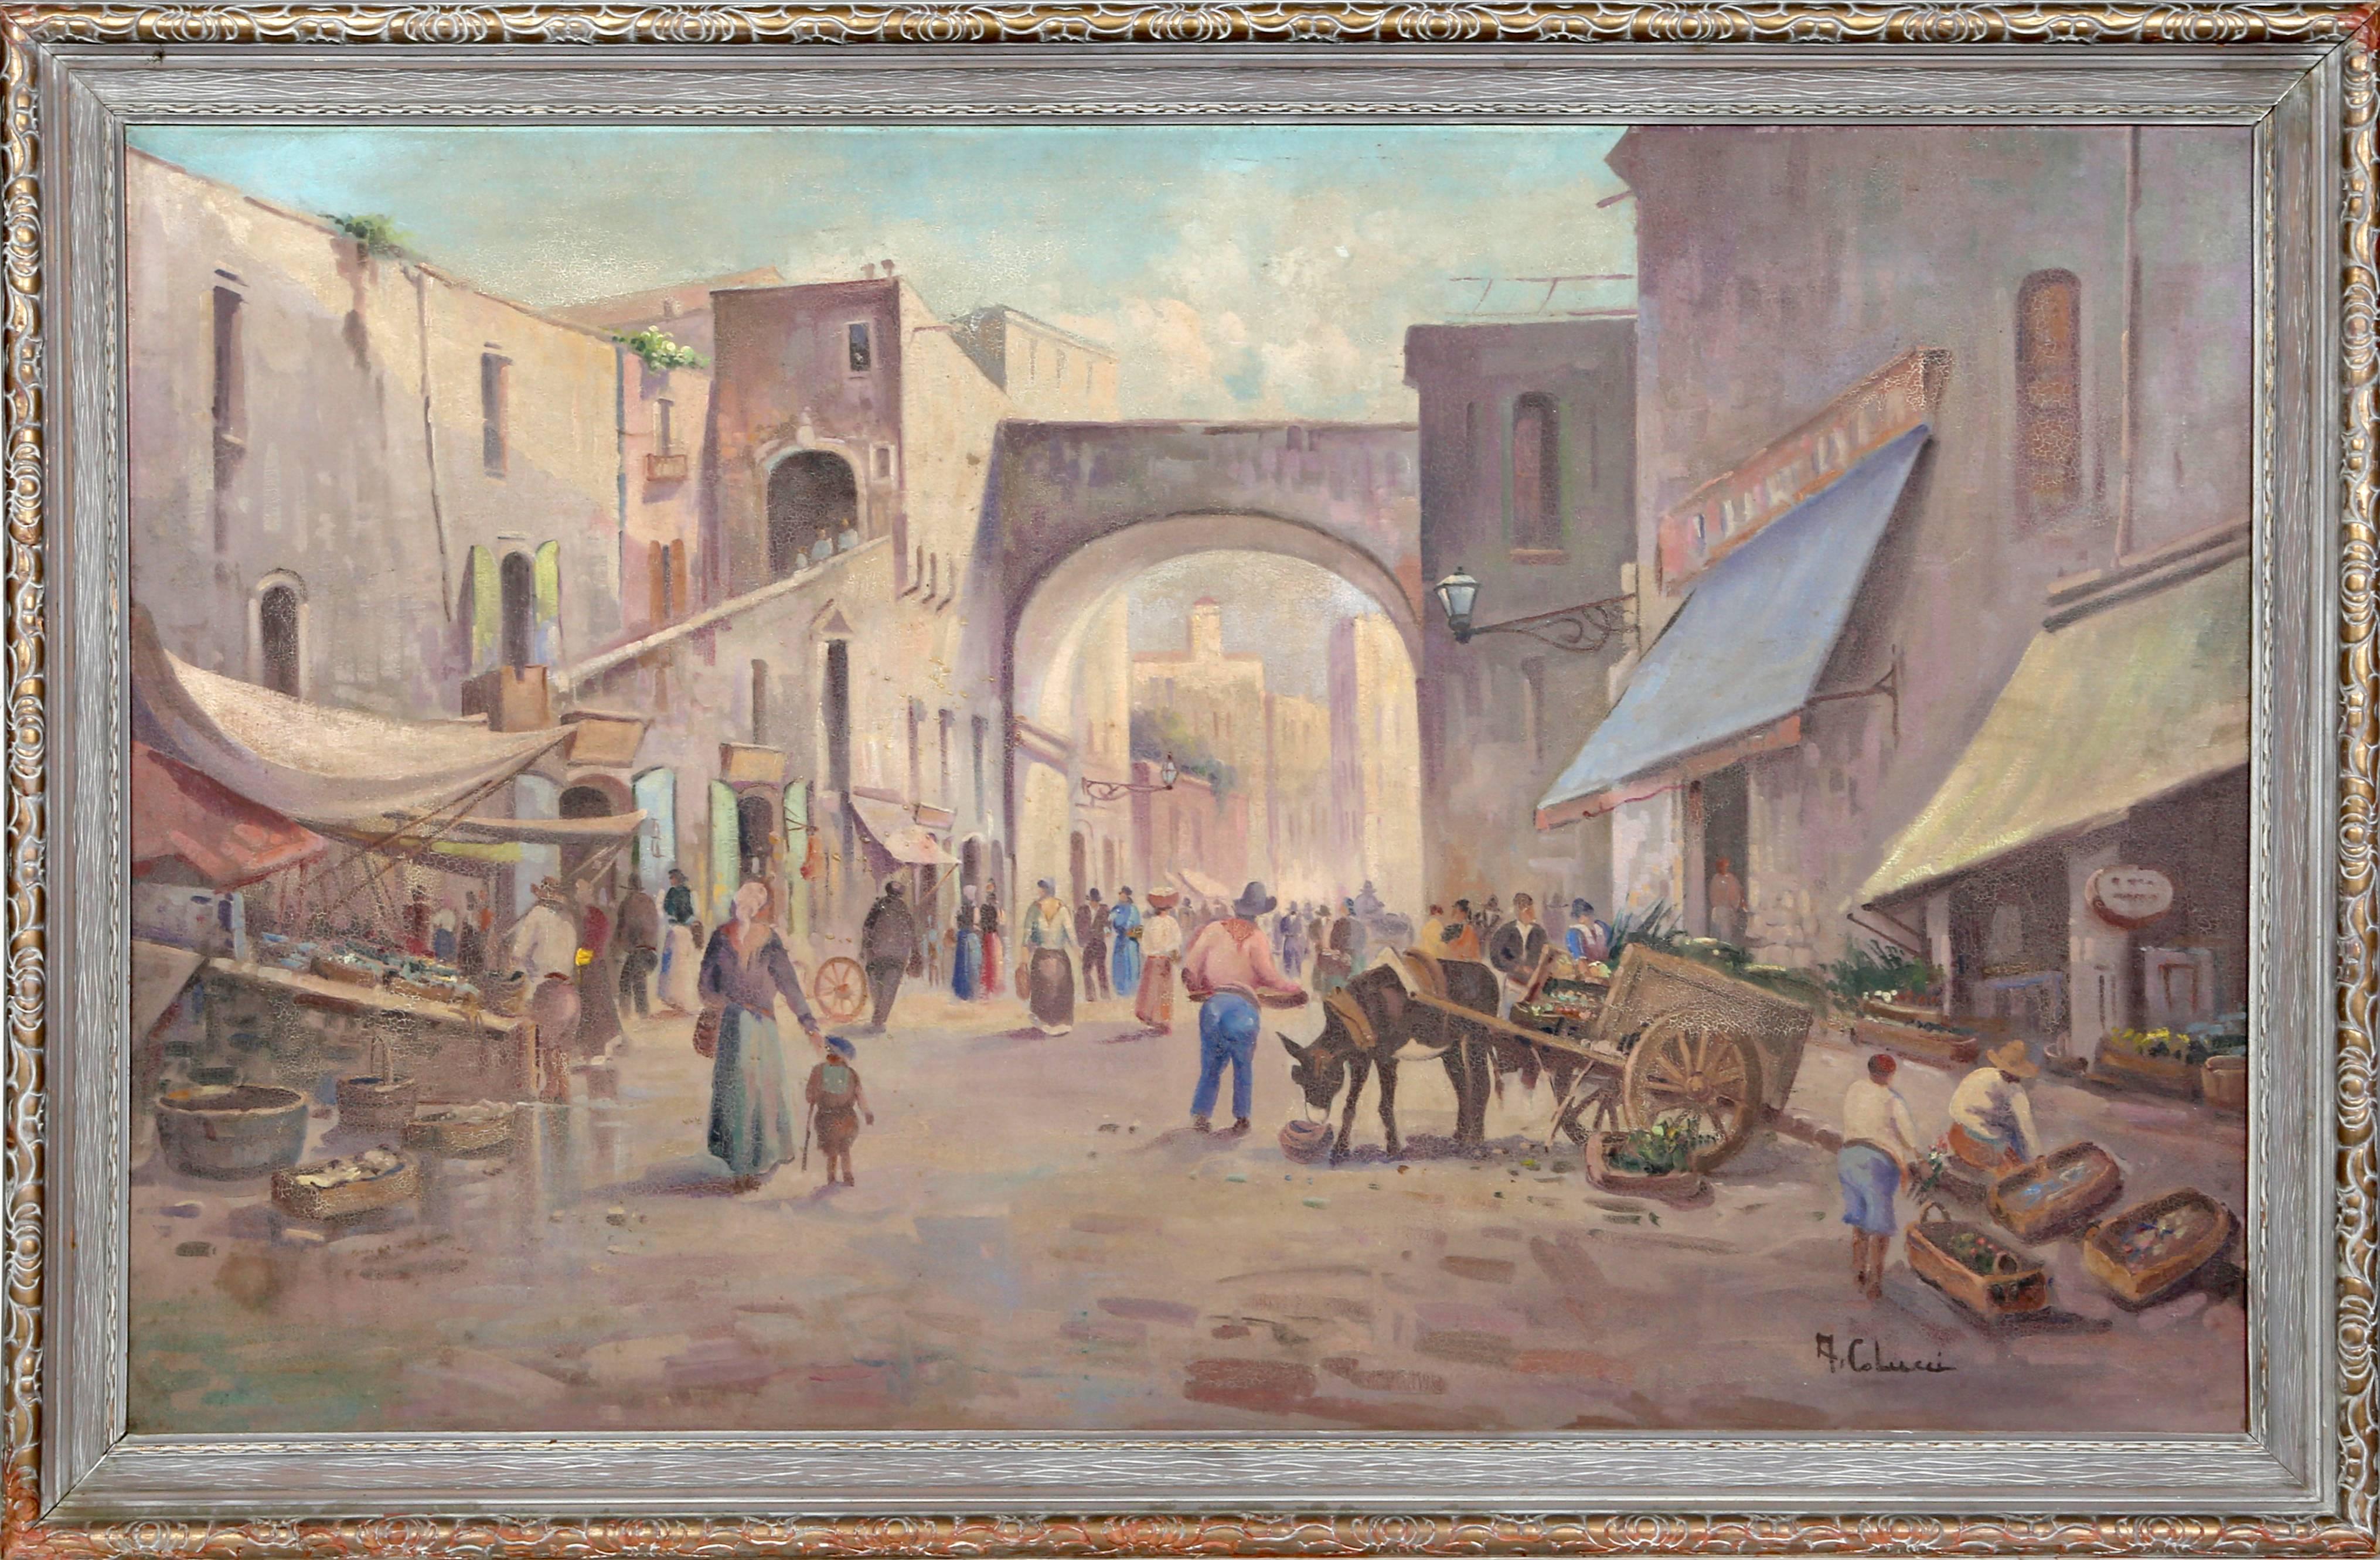 A. Colucci Landscape Painting - Village Market, Large Italian Painting by Colucci